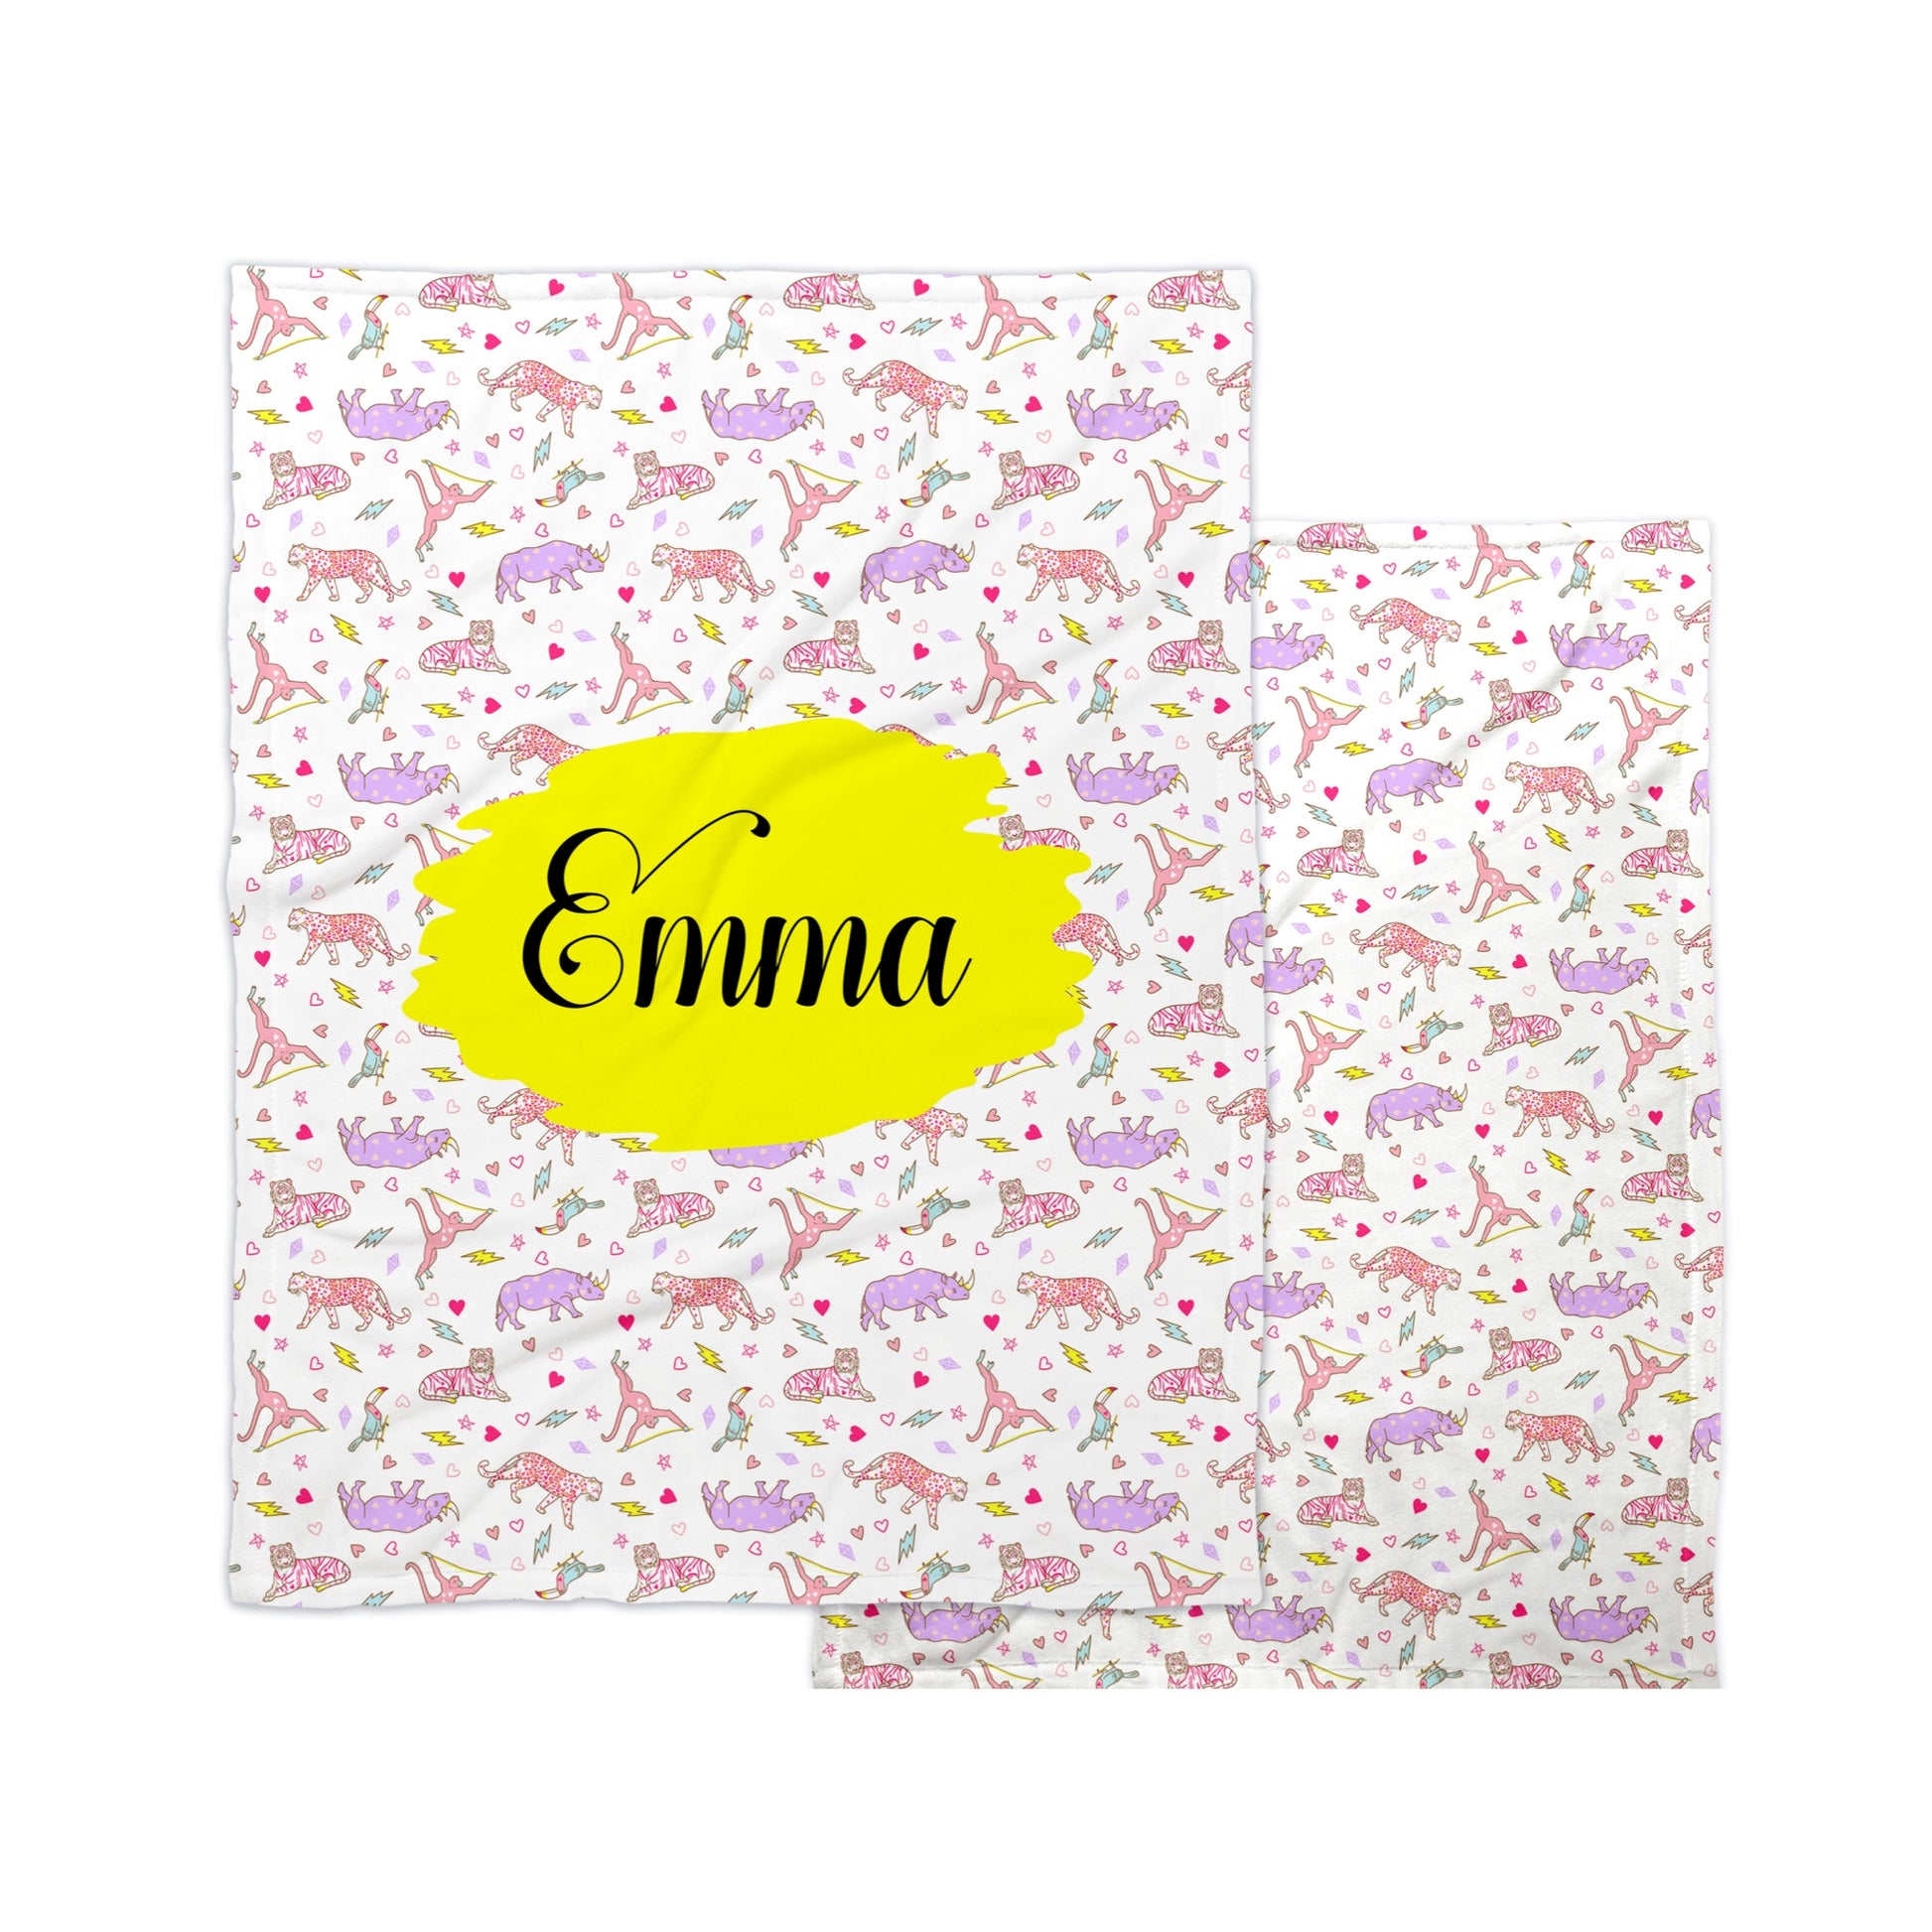 Wild Daisy gallery animal Valentine patterned fleece blankets with customizable name.